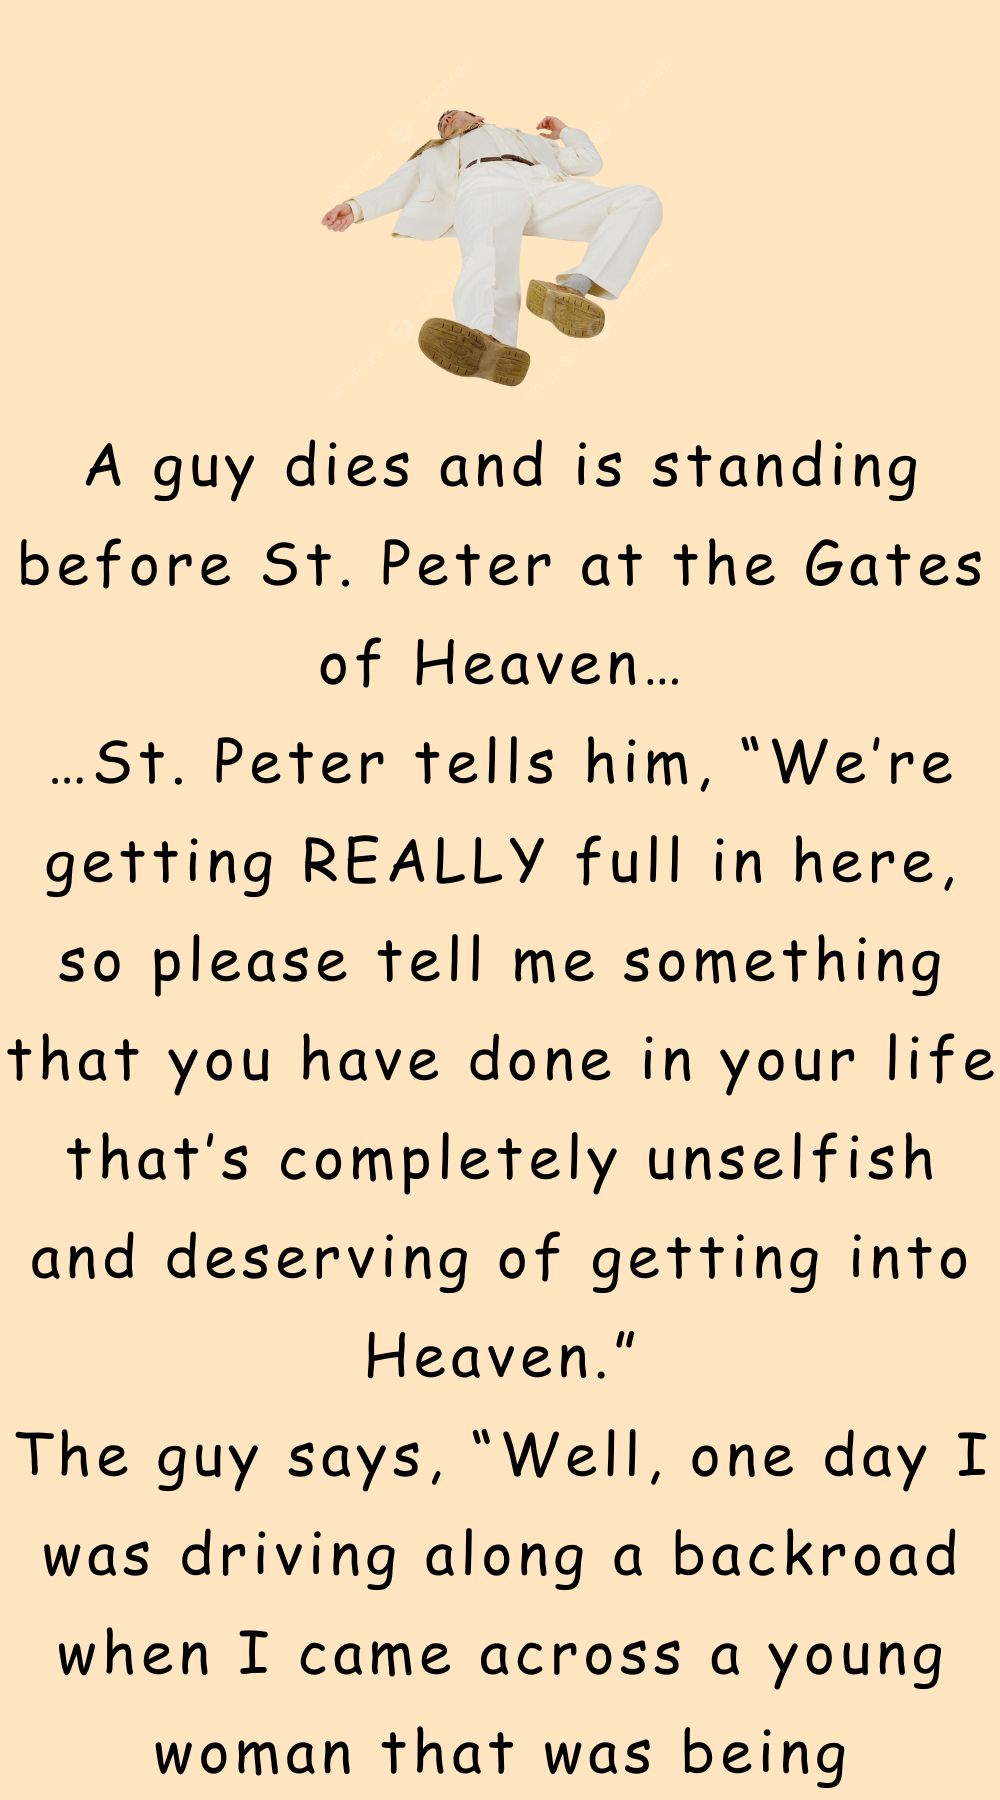 A guy dies and is standing before St. Peter at the Gates of Heaven